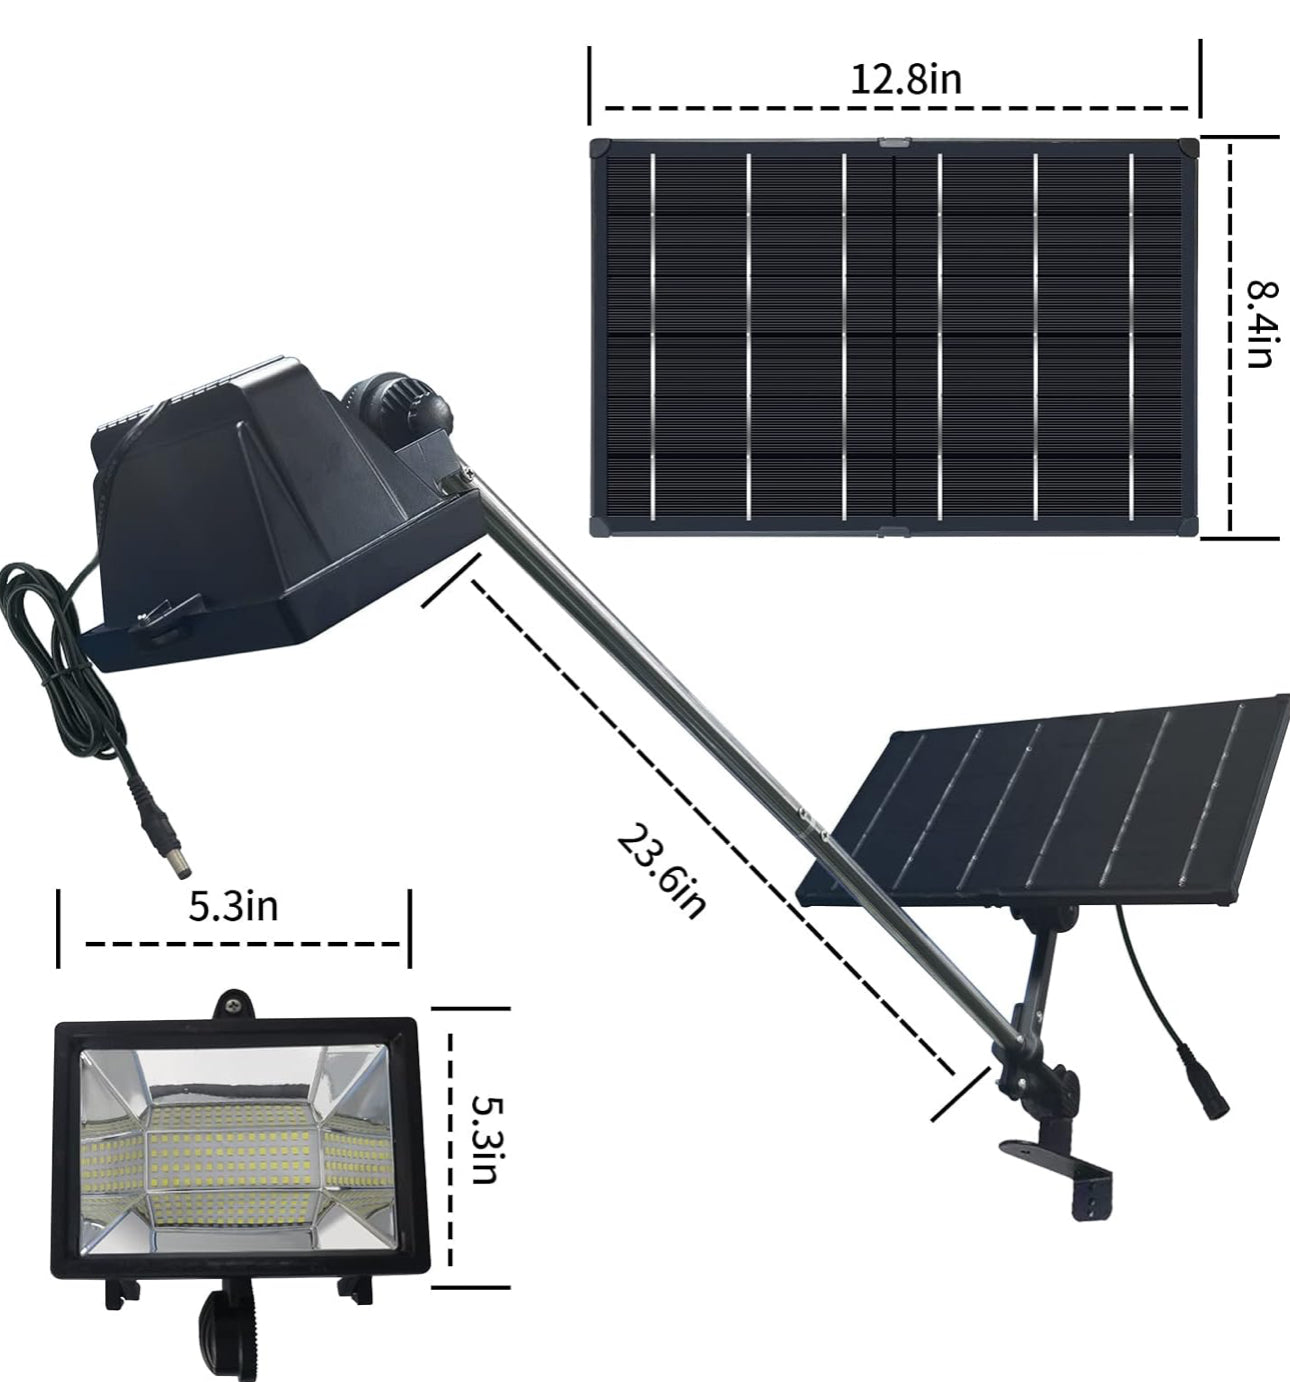 Solar Billboard Light Metal Aluminum Lamp Heads,400W 12000AMH Li-on Battery, 60 LED Super Bright Light, Commercial Billboard Lamp Suitable for a Variety of Scenes